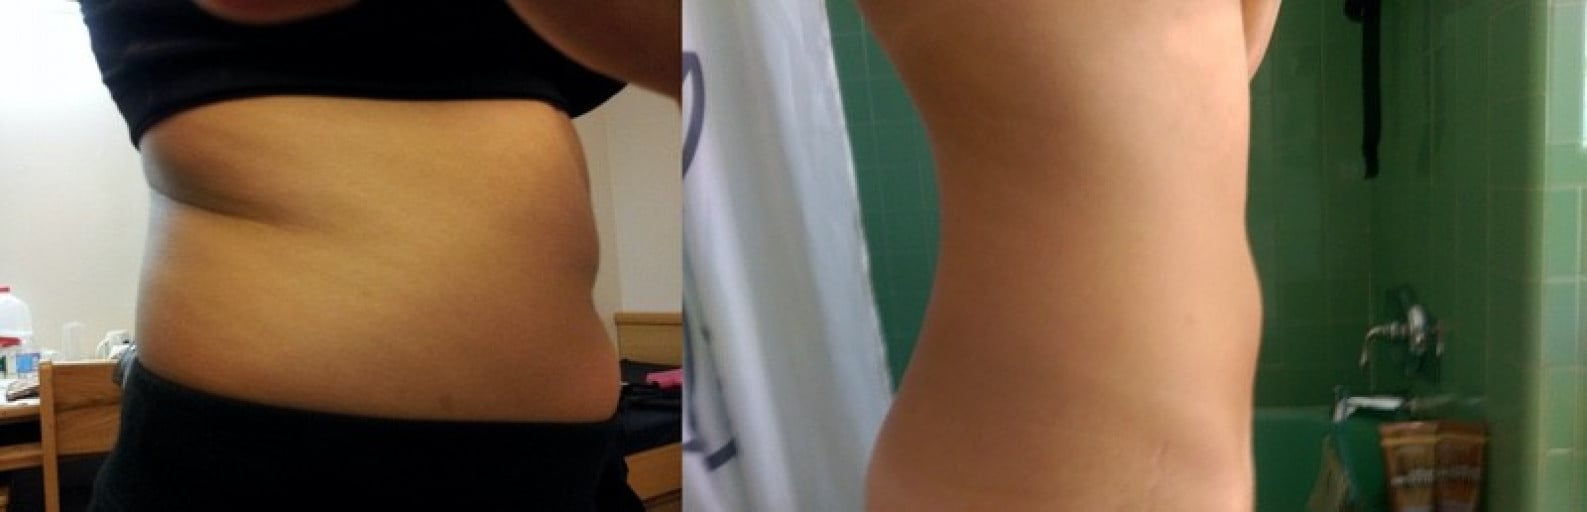 A progress pic of a 5'1" woman showing a fat loss from 134 pounds to 110 pounds. A respectable loss of 24 pounds.